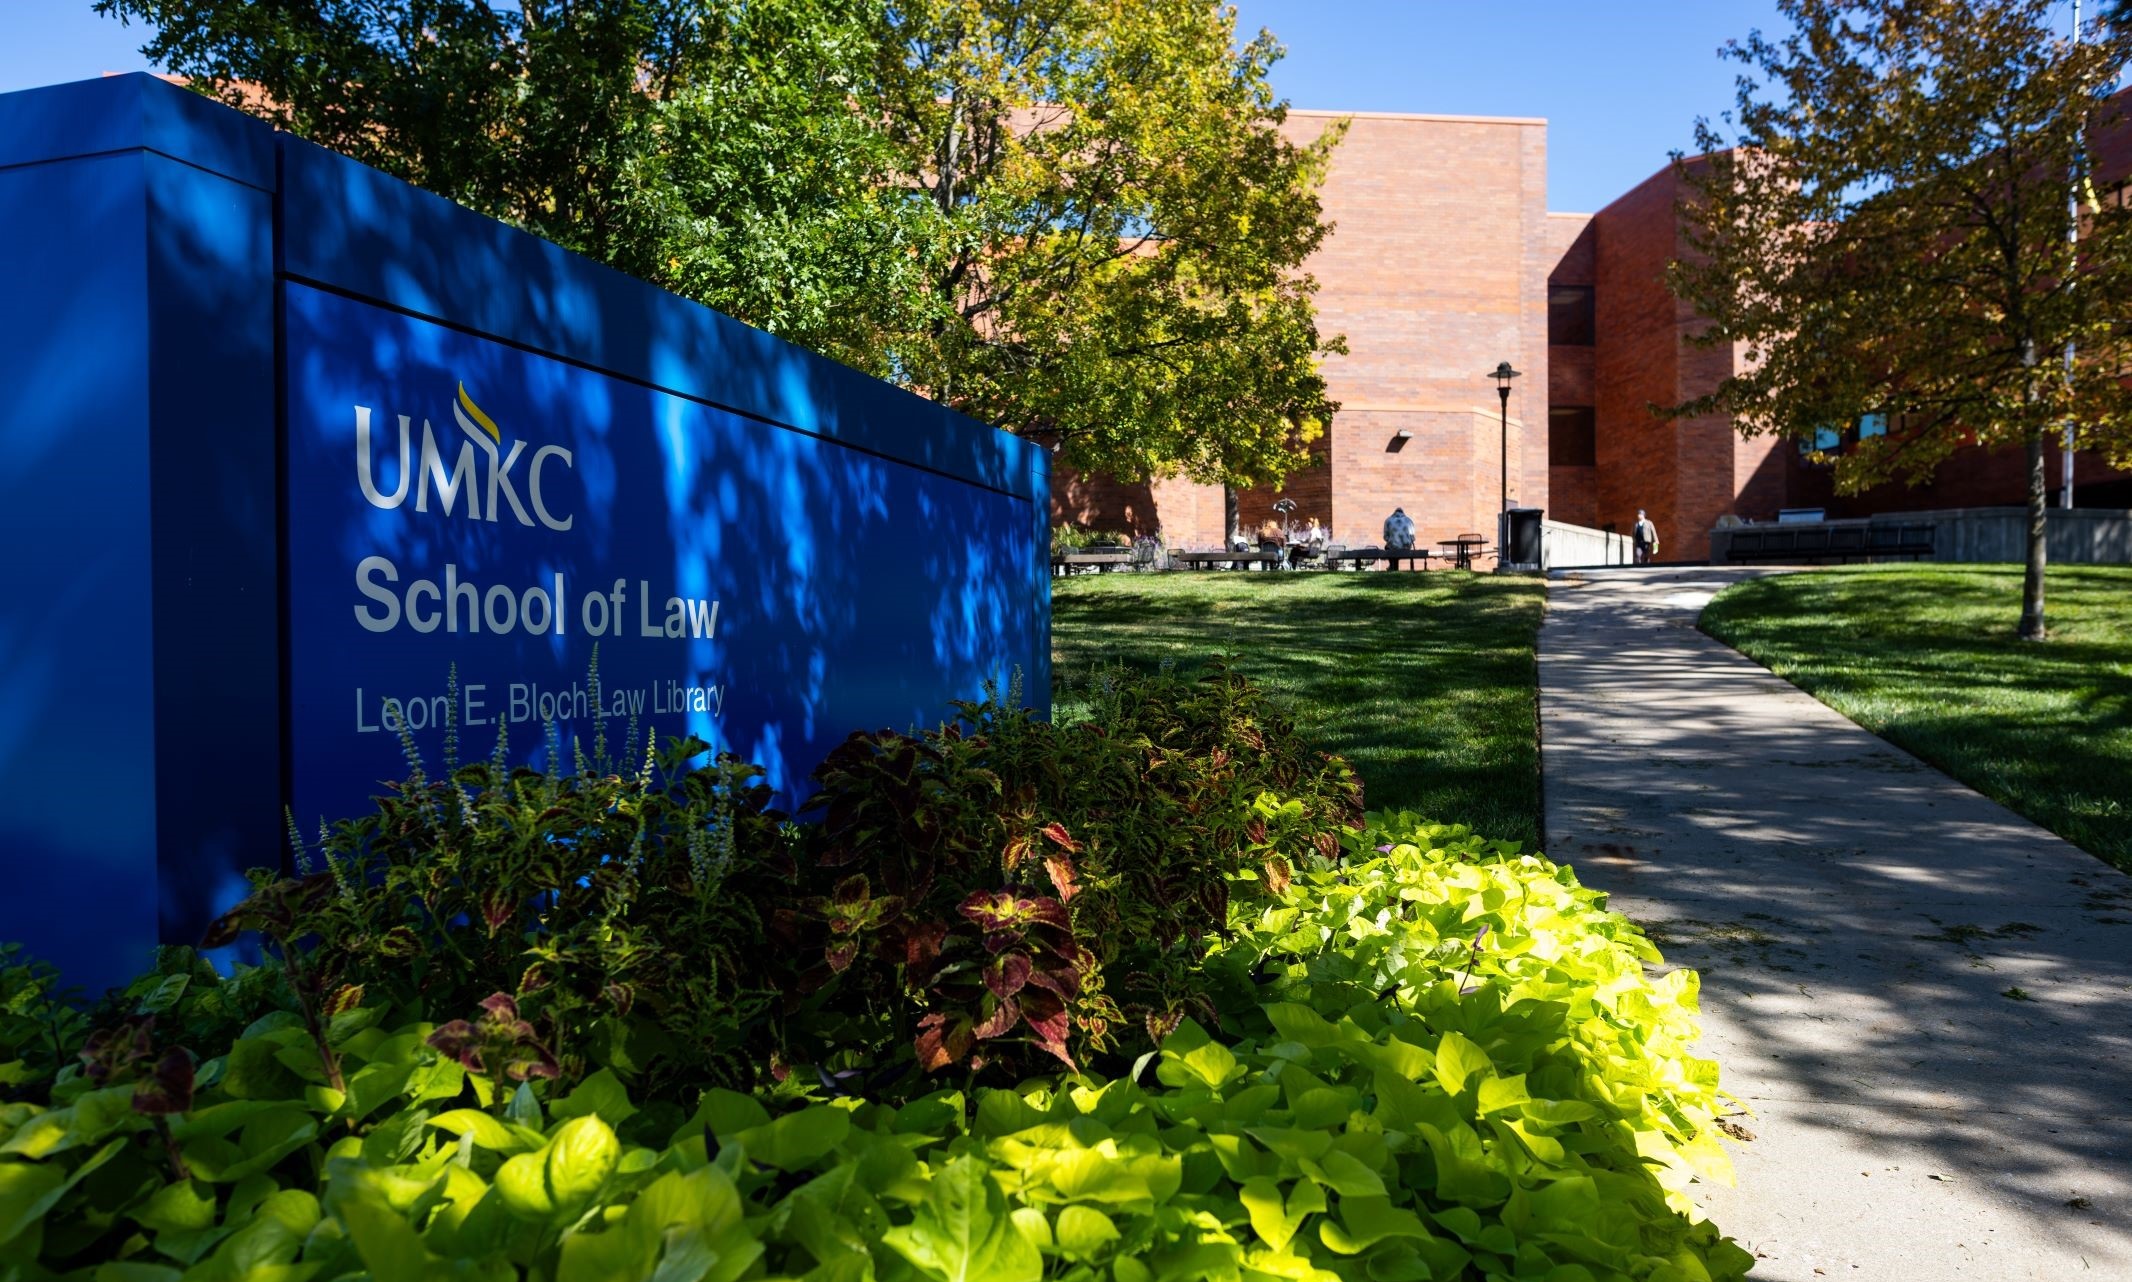 UMKC School of Law sign with the red brick building in the background